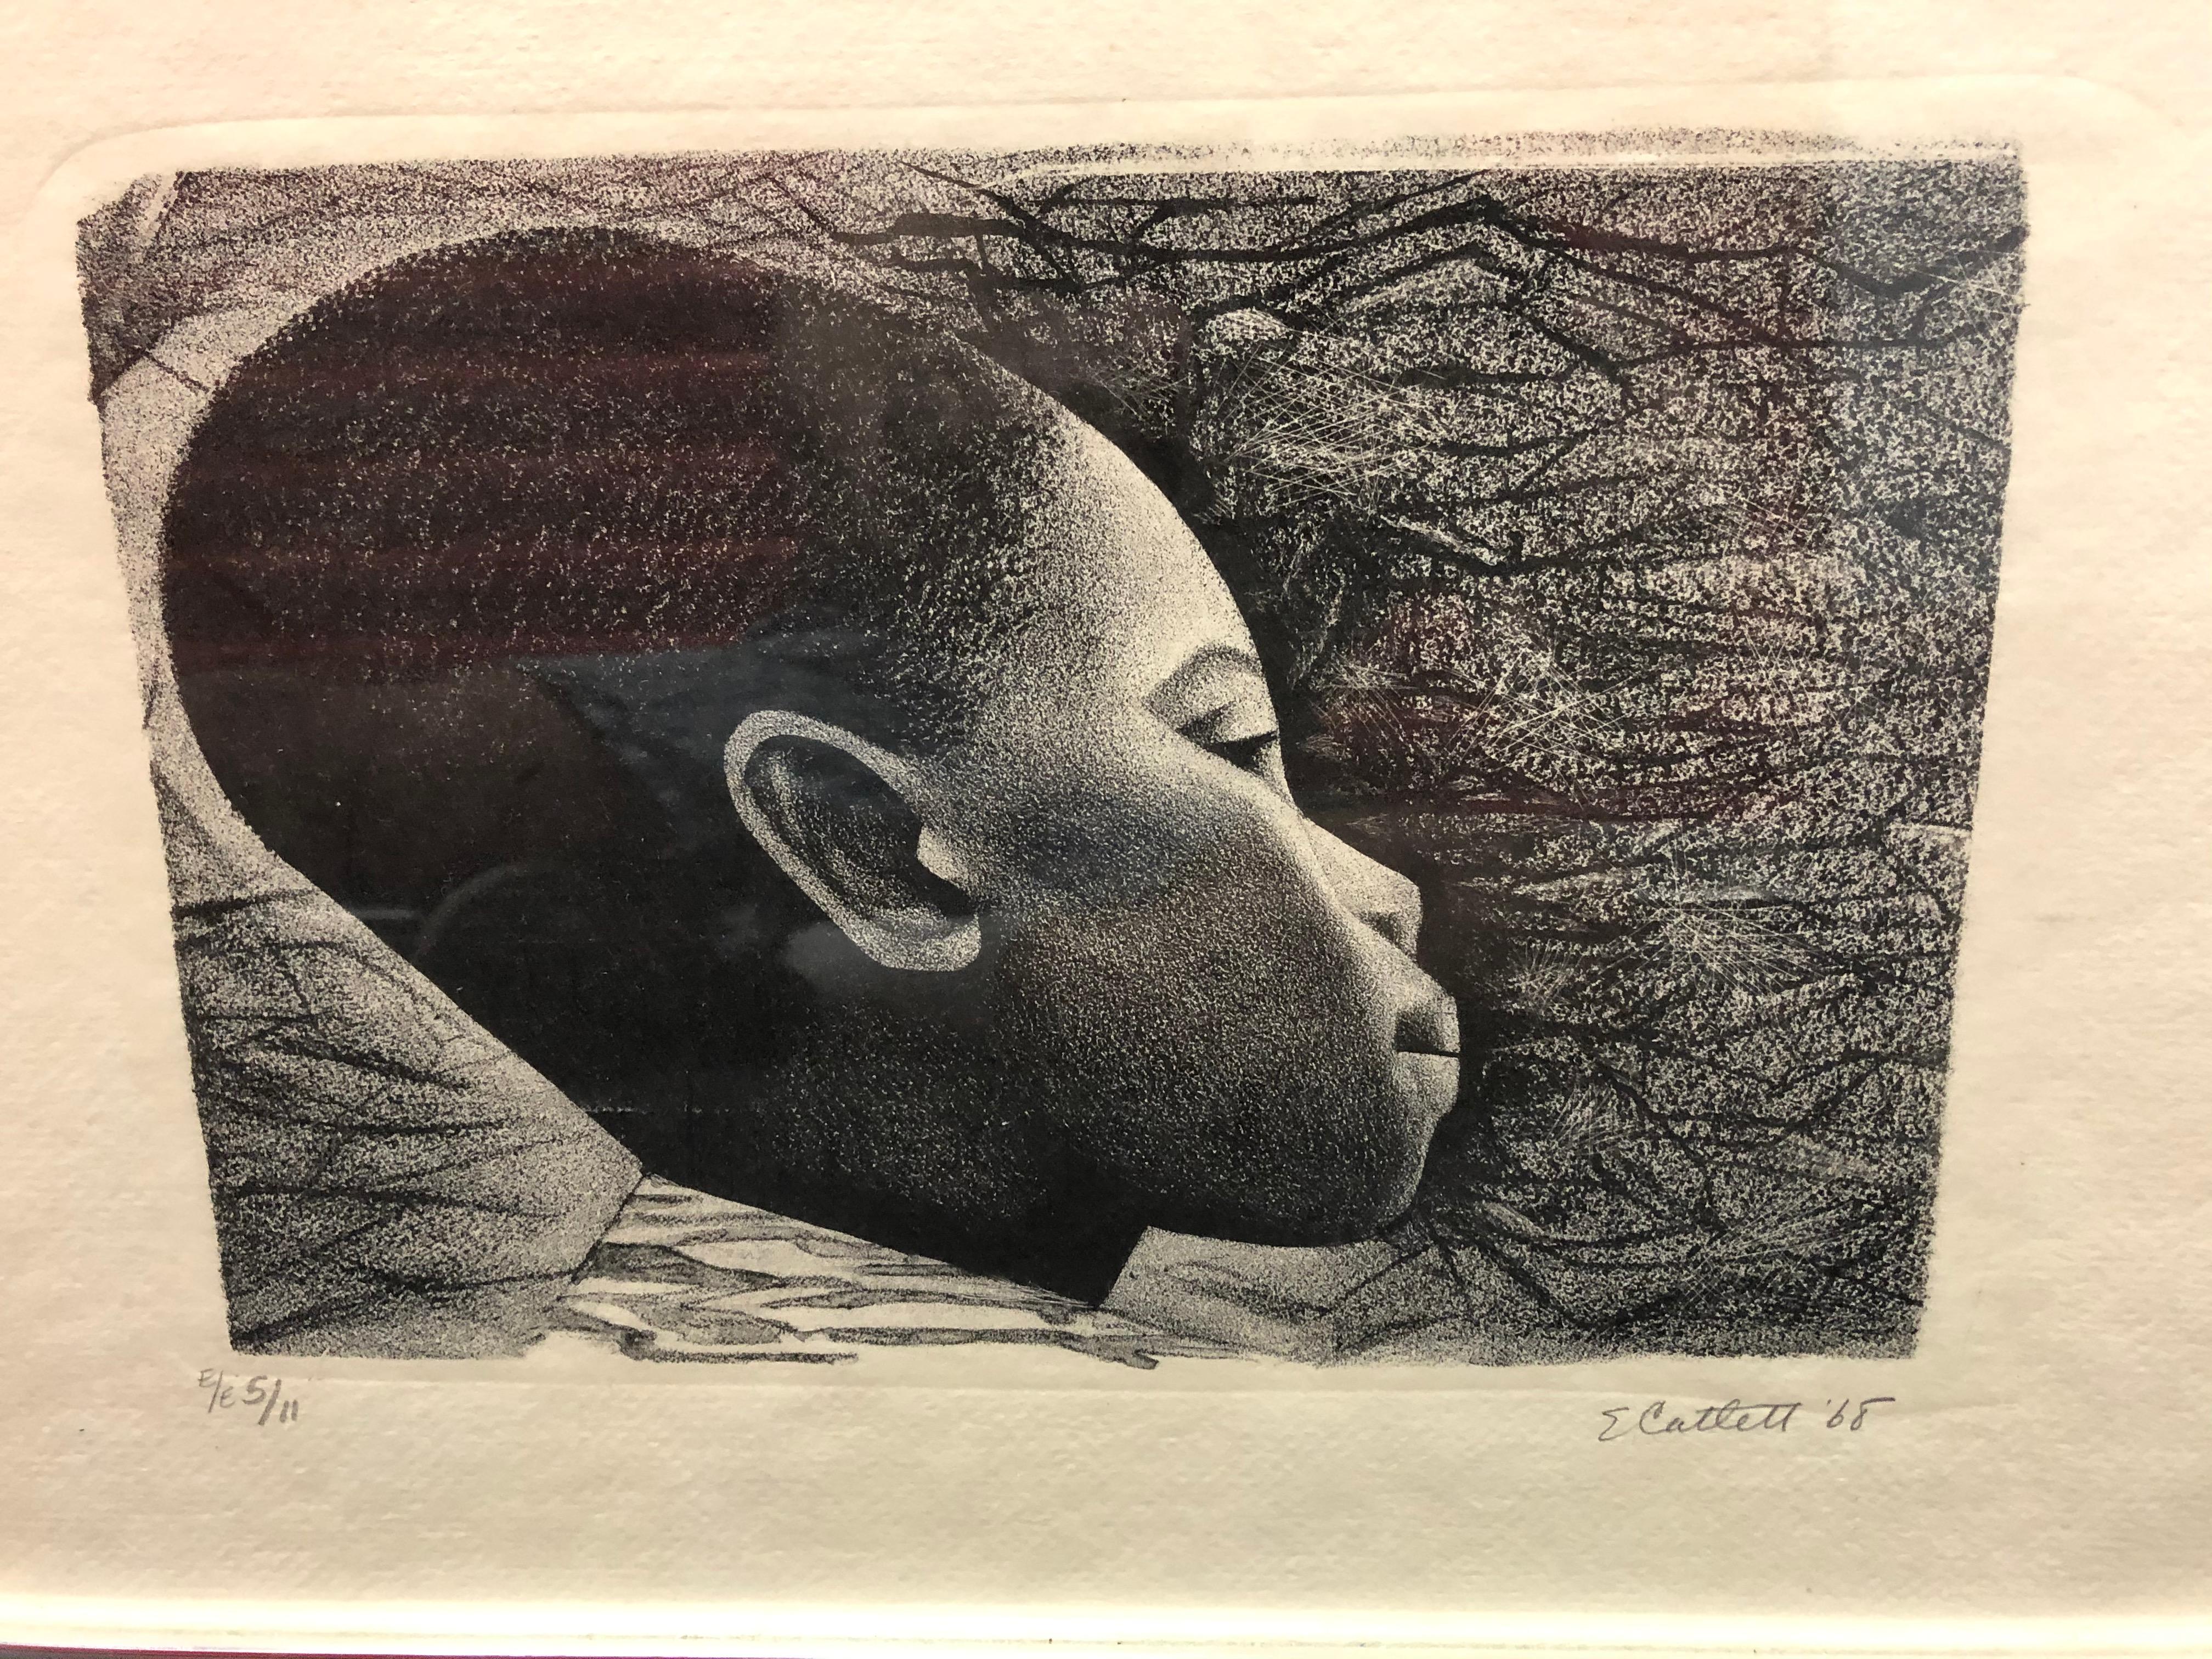 Elizabeth Catlett: 1915-2012. Well listed and very important African American artist. This lithograph is usually titled Negro es Bello or Black is Beautiful, but this is very first state and early edition "EE" before she came up with title.